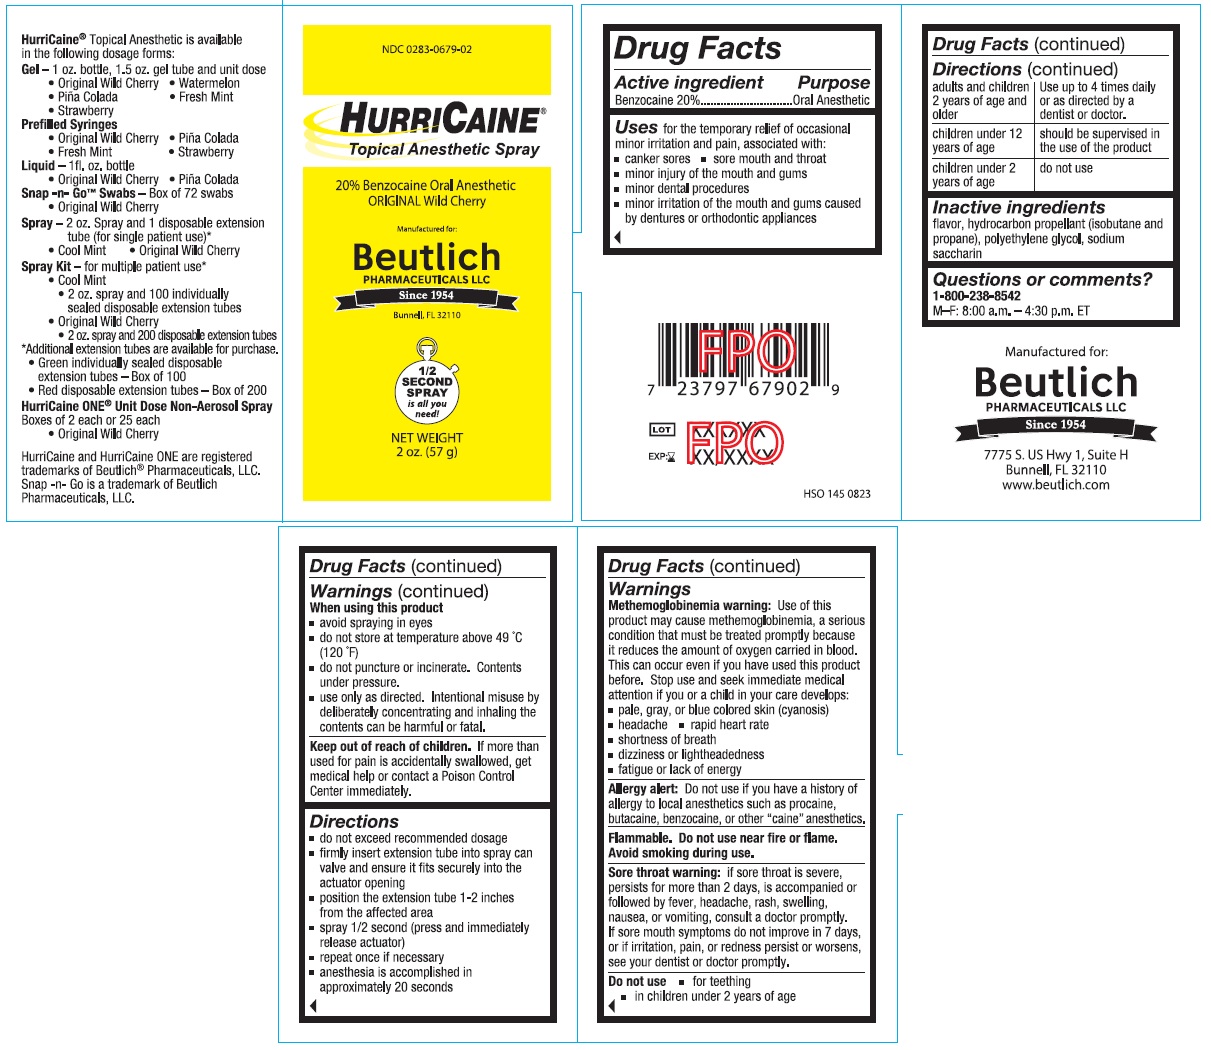 Primary Product Label